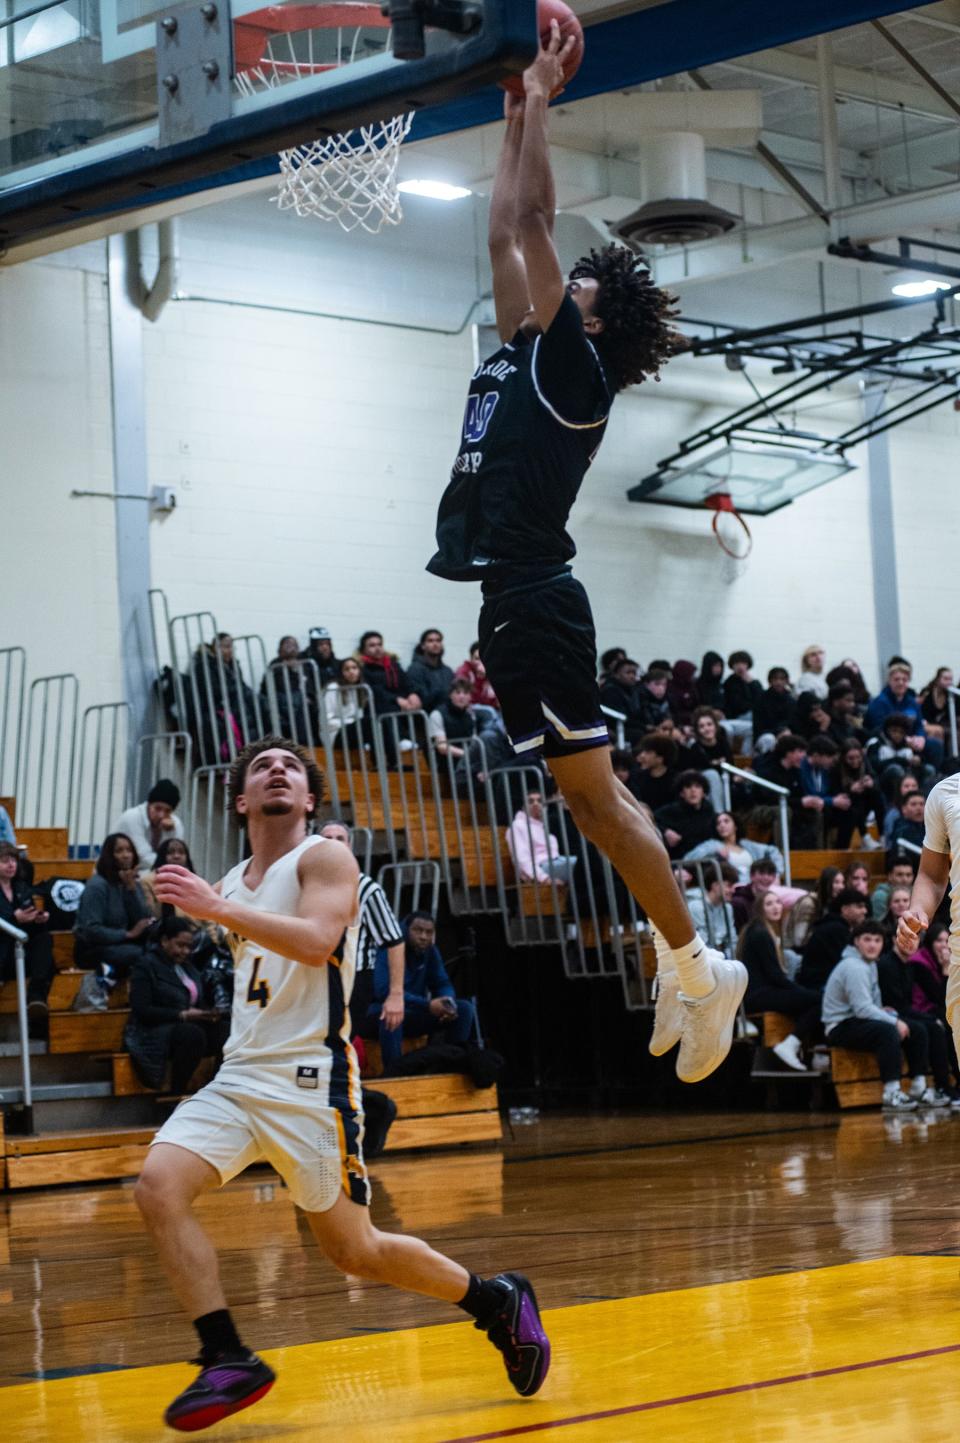 Monroe's Jankarlos Mendoza dunks during the Section 9 boys basketball at Pine Bush High School in Pine Bush, NY on Friday, January 5, 2026. Monroe-Woodbury defeated Pine Bush 94-43. KELLY MARSH/FOR THE TIMES HERALD-RECORD